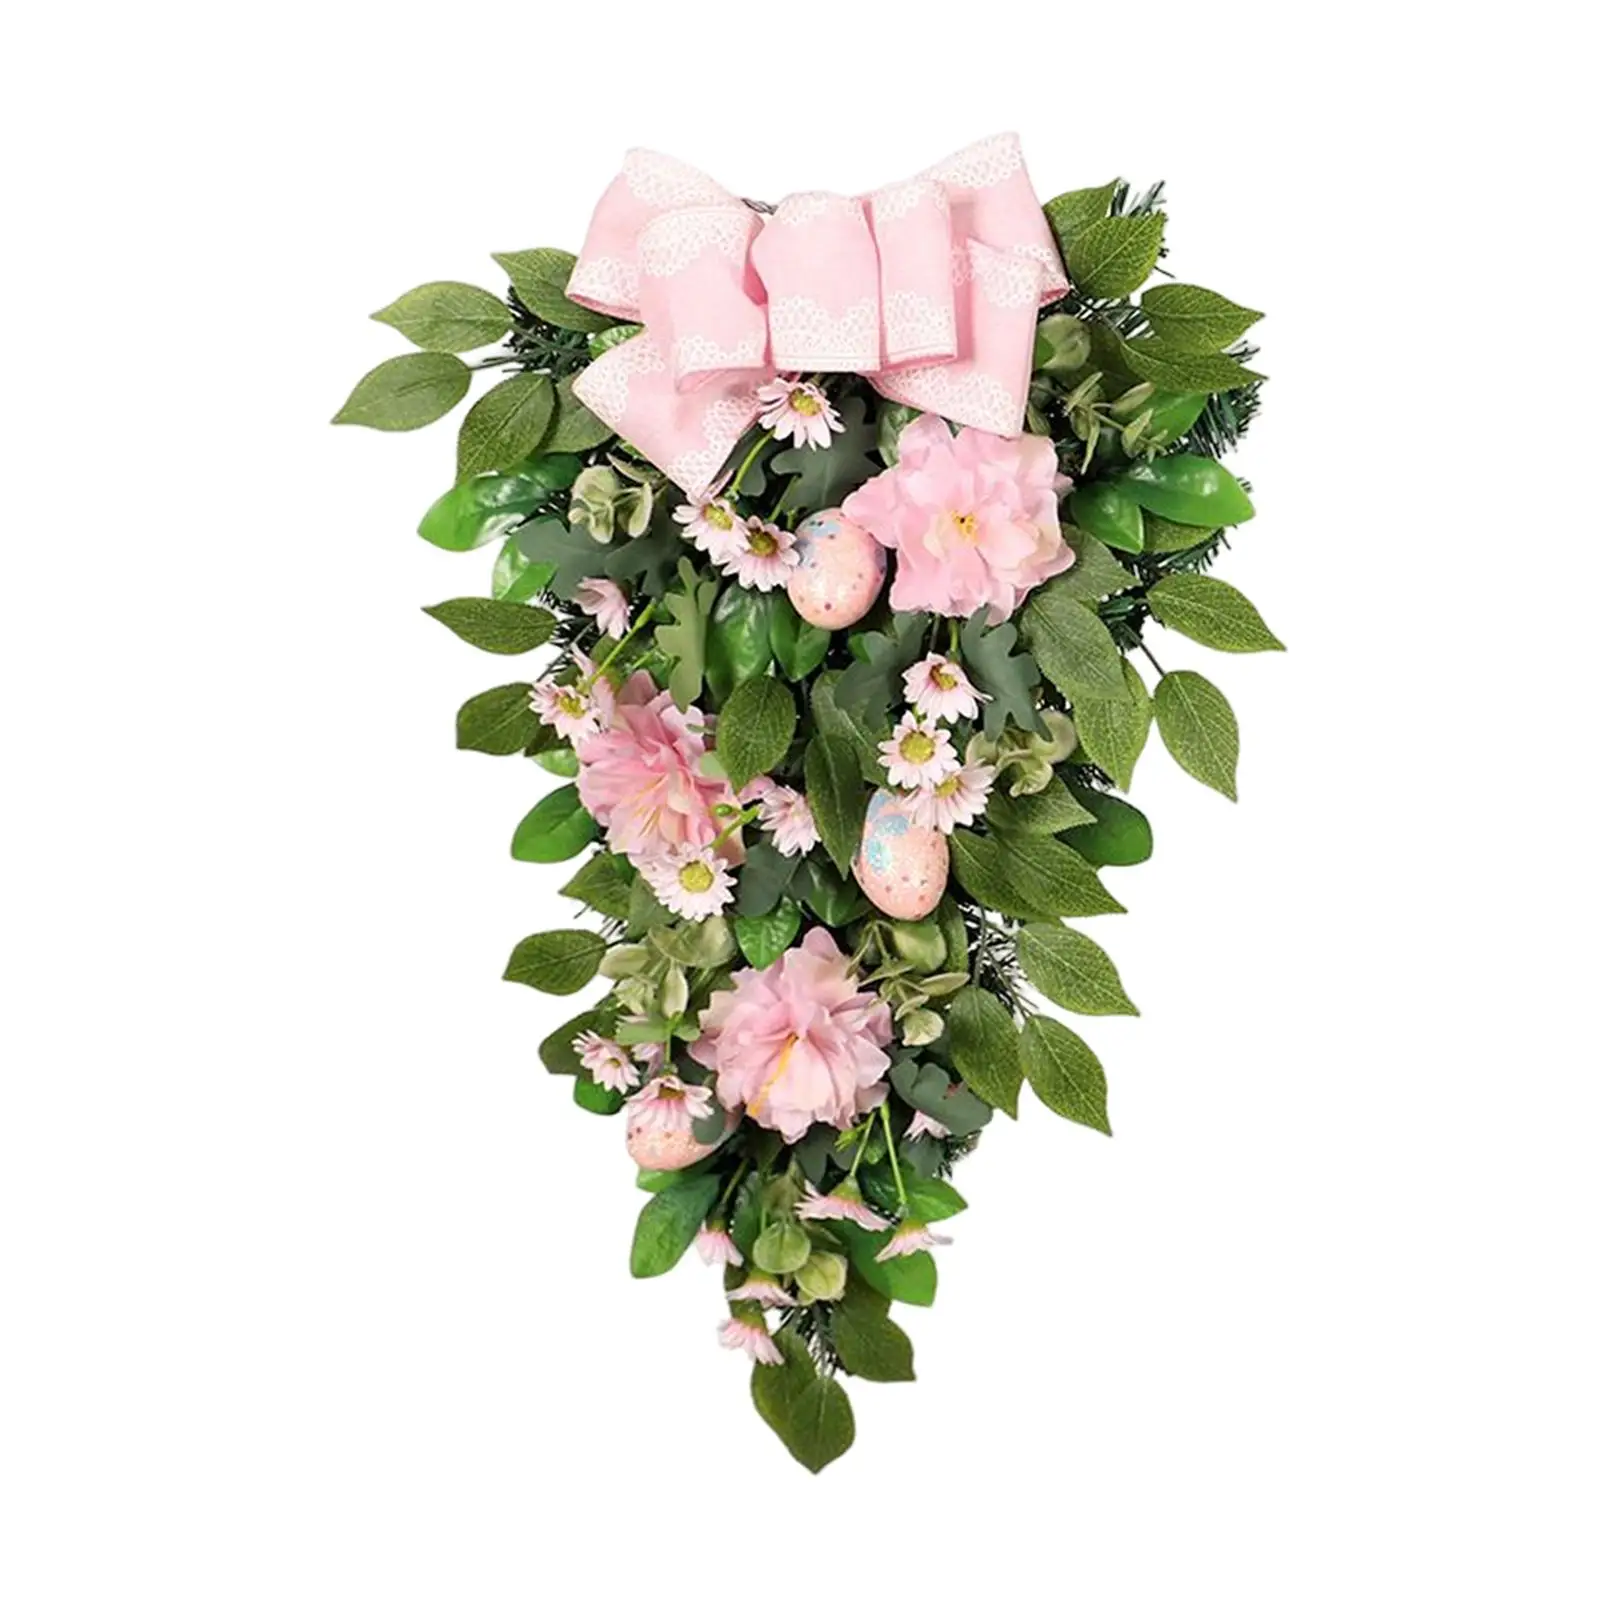 Decorative Easter Teardrop Wreath with Bowknot Wall Hanging Pink Flowers Garland Ornaments Swag for Festival Backdrop